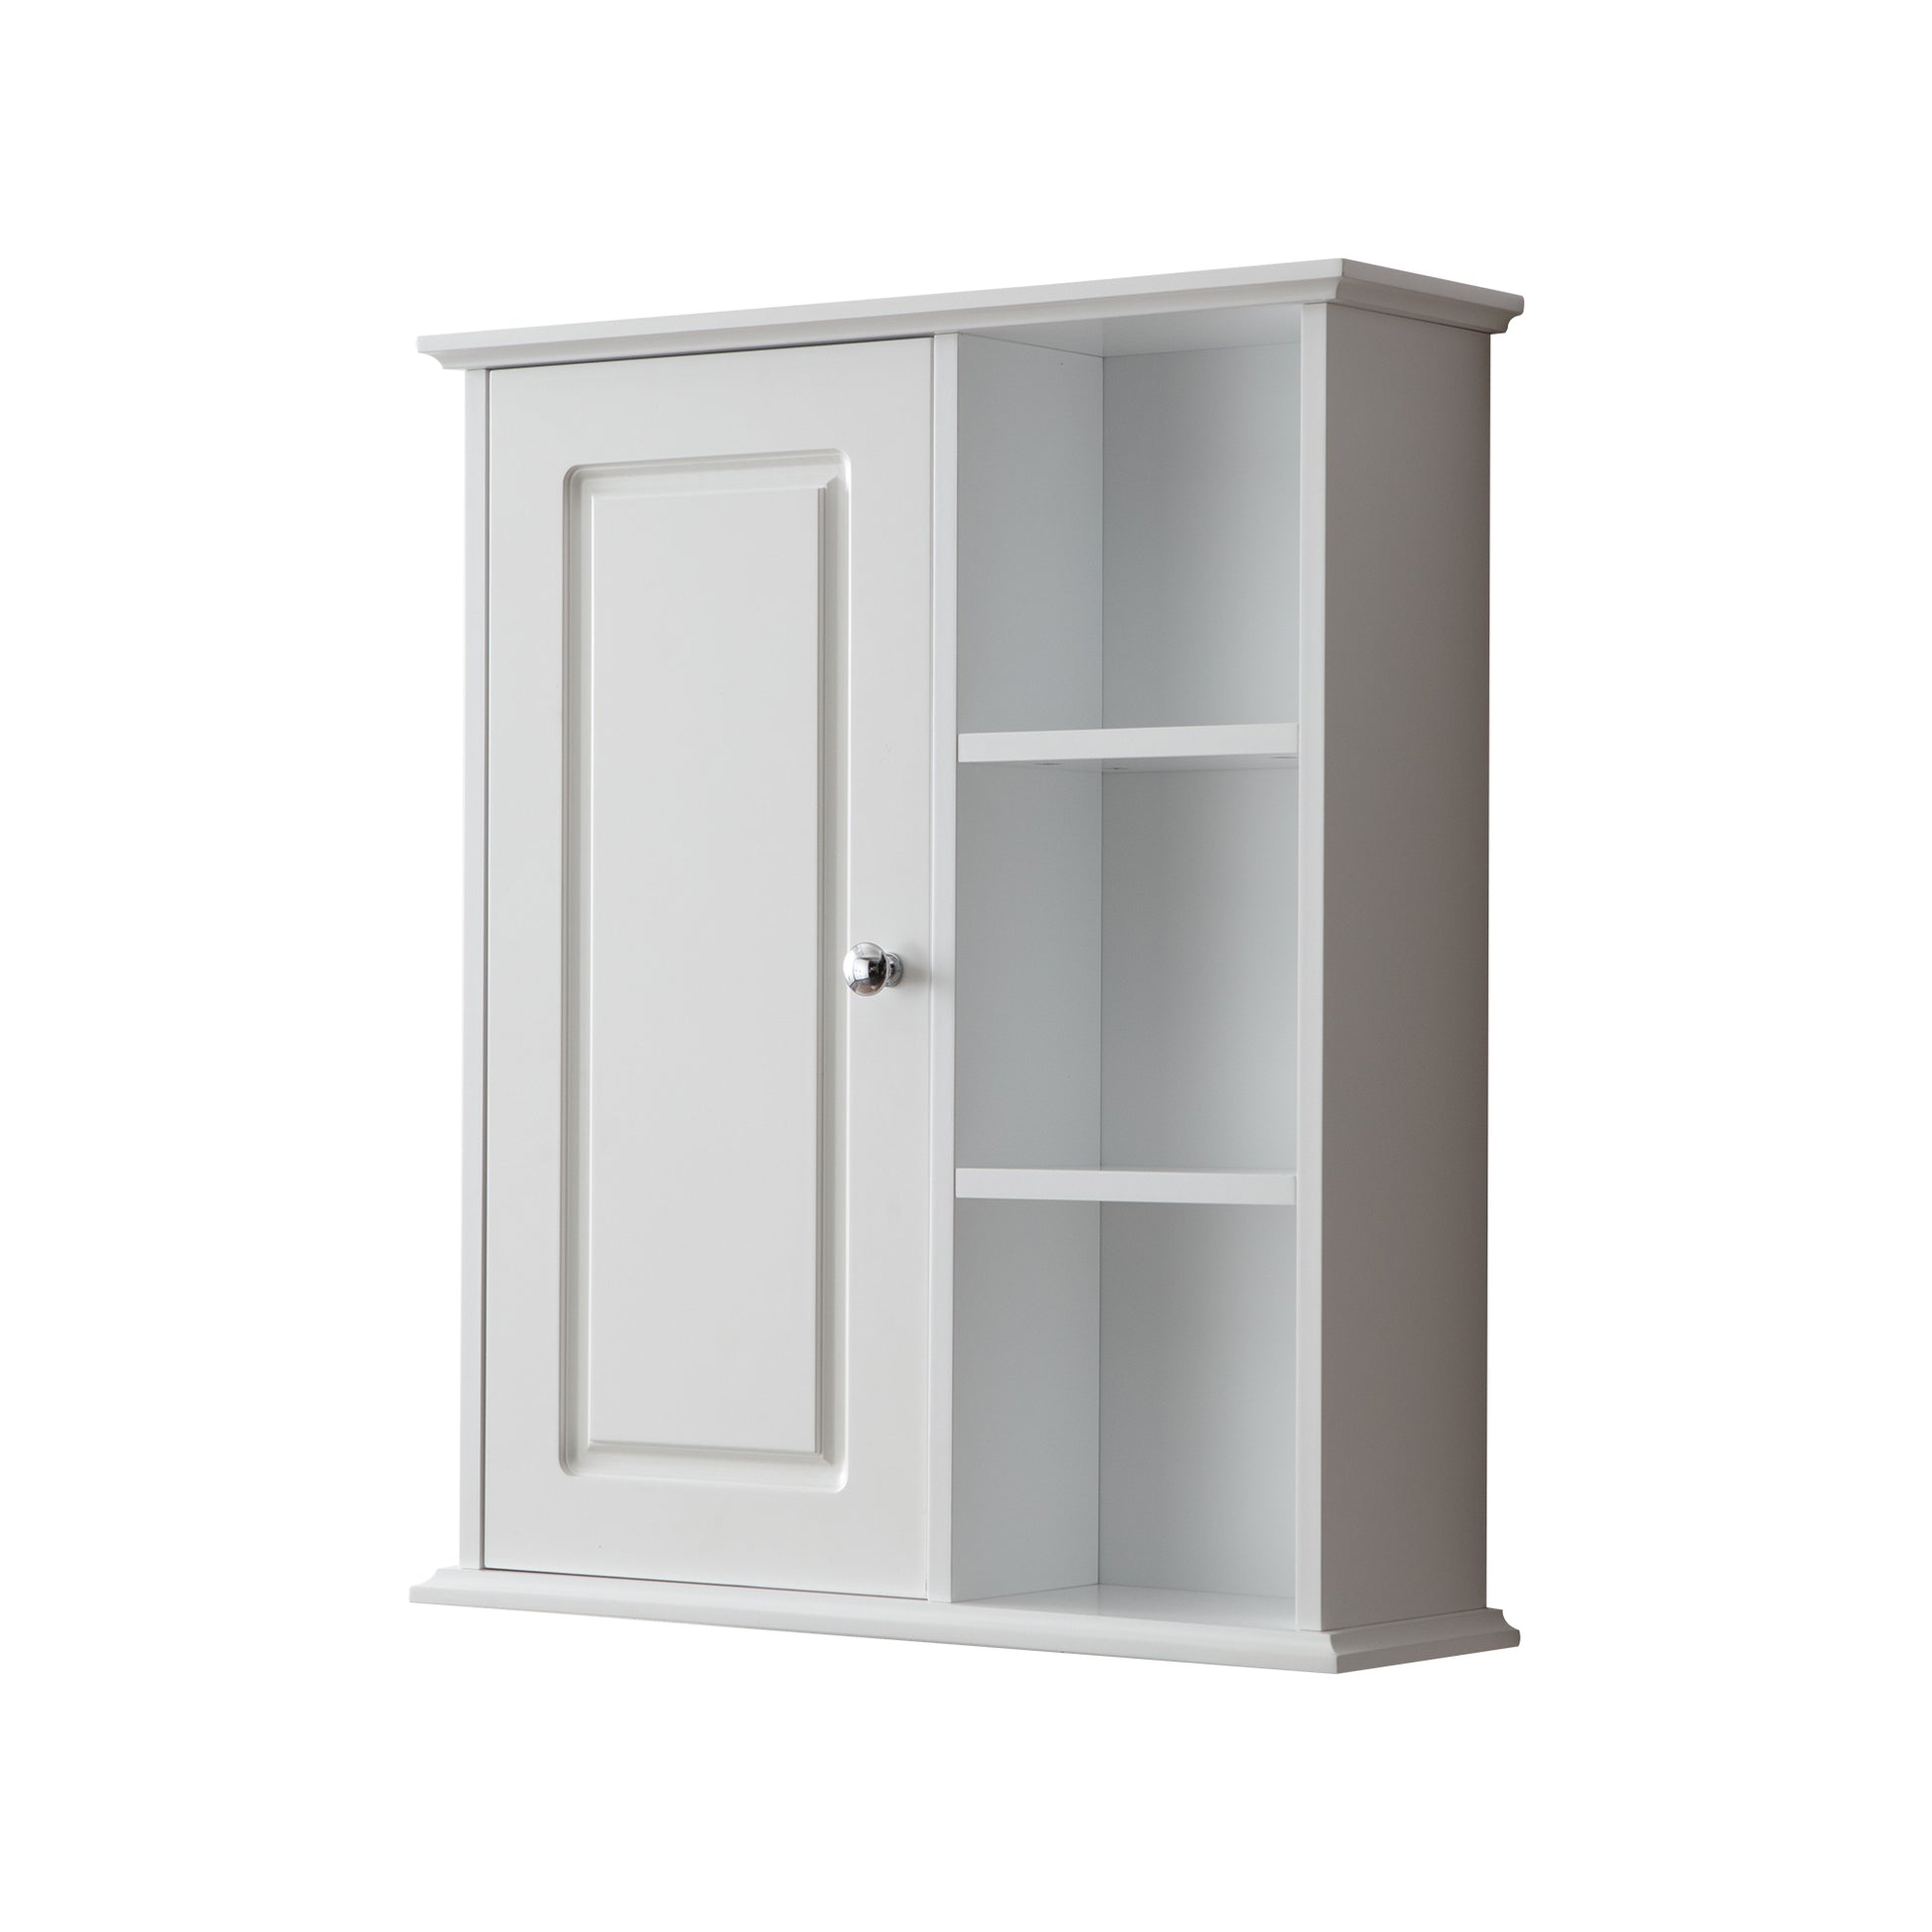 Bathroom Wall Cabinet in Black Ready to Assemble white-1-3-soft close doors-wall